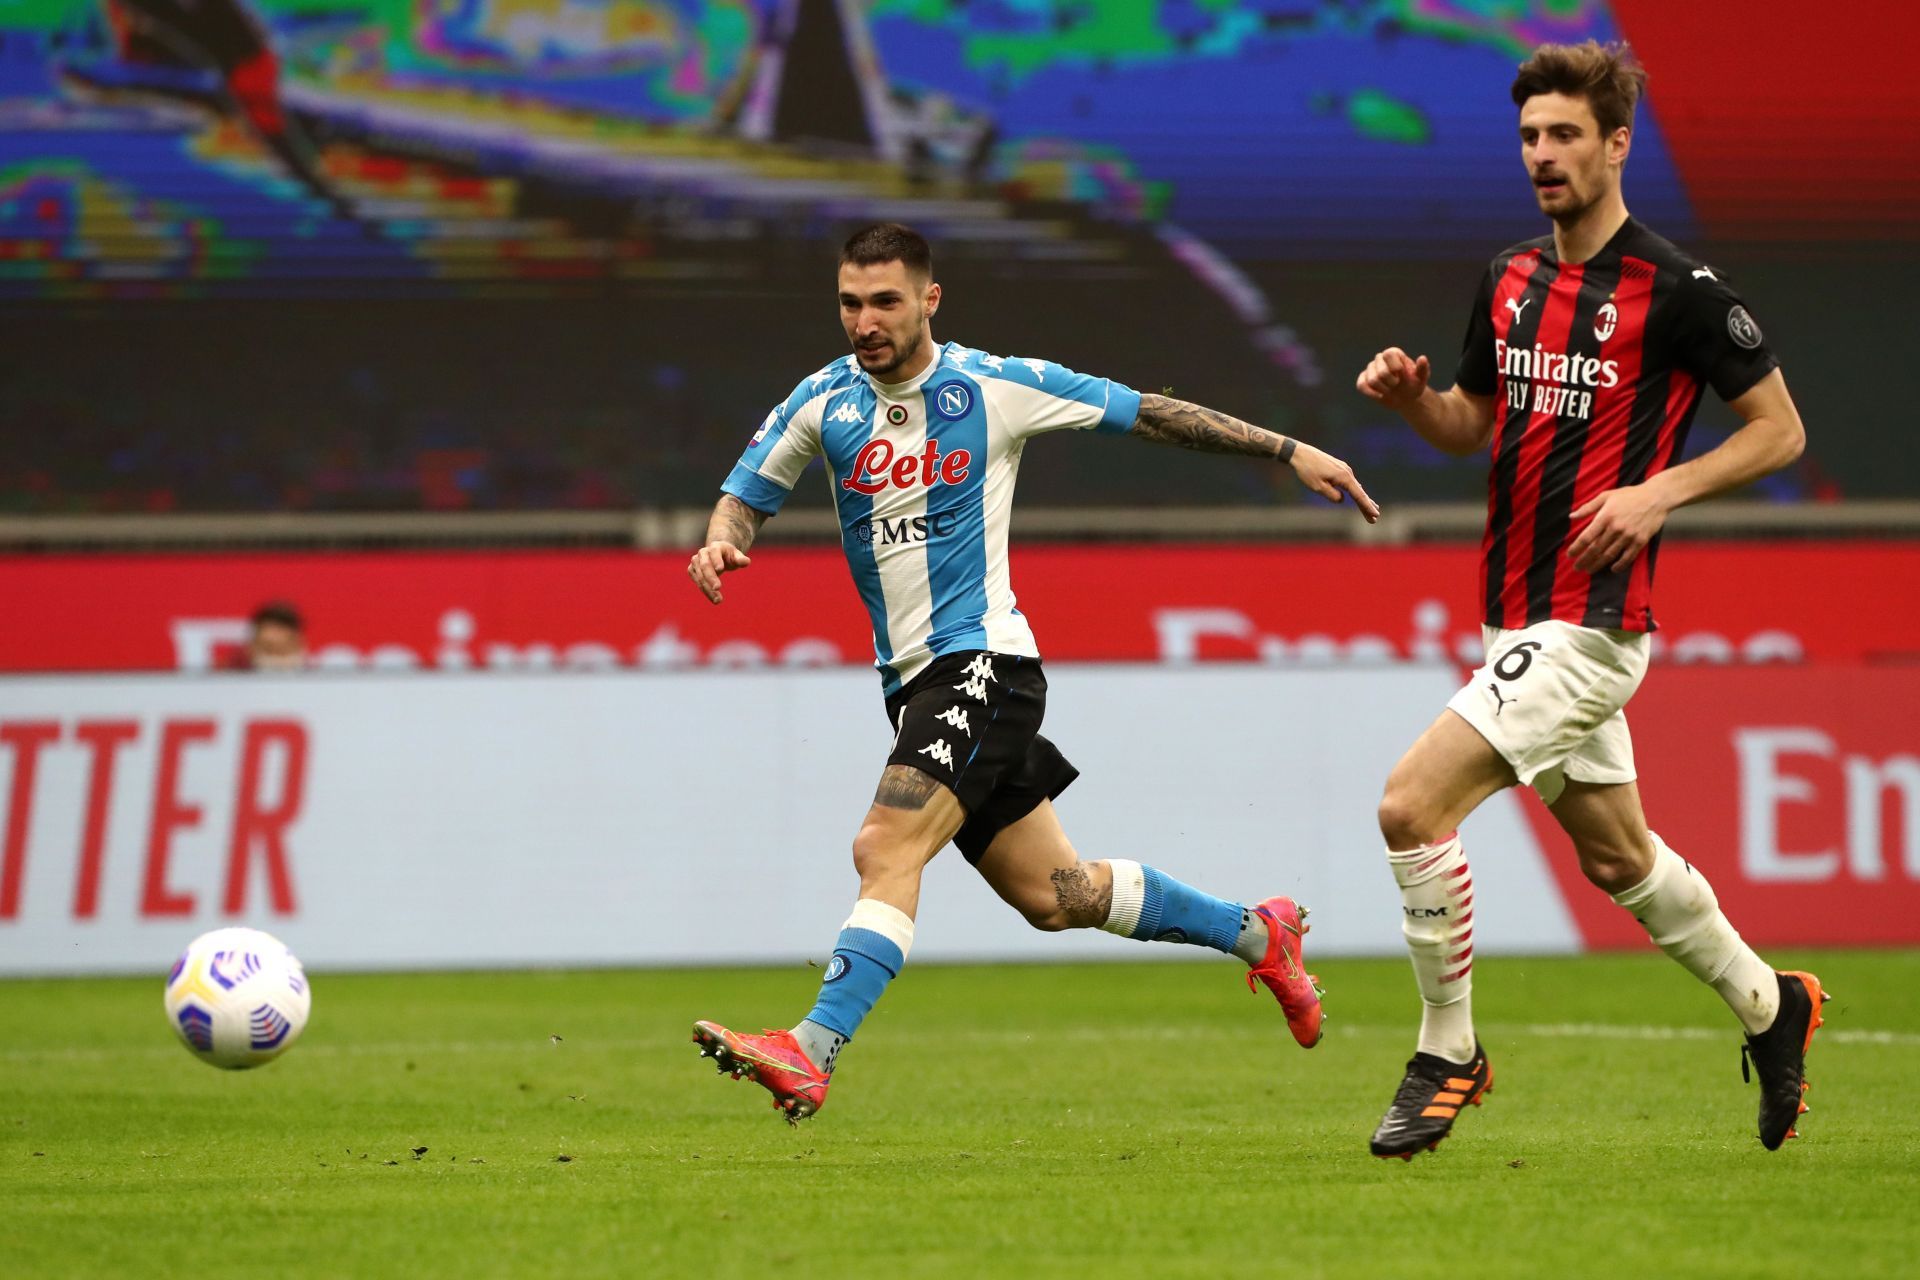 AC Milan and Napoli are desperate to get their title charge back on track